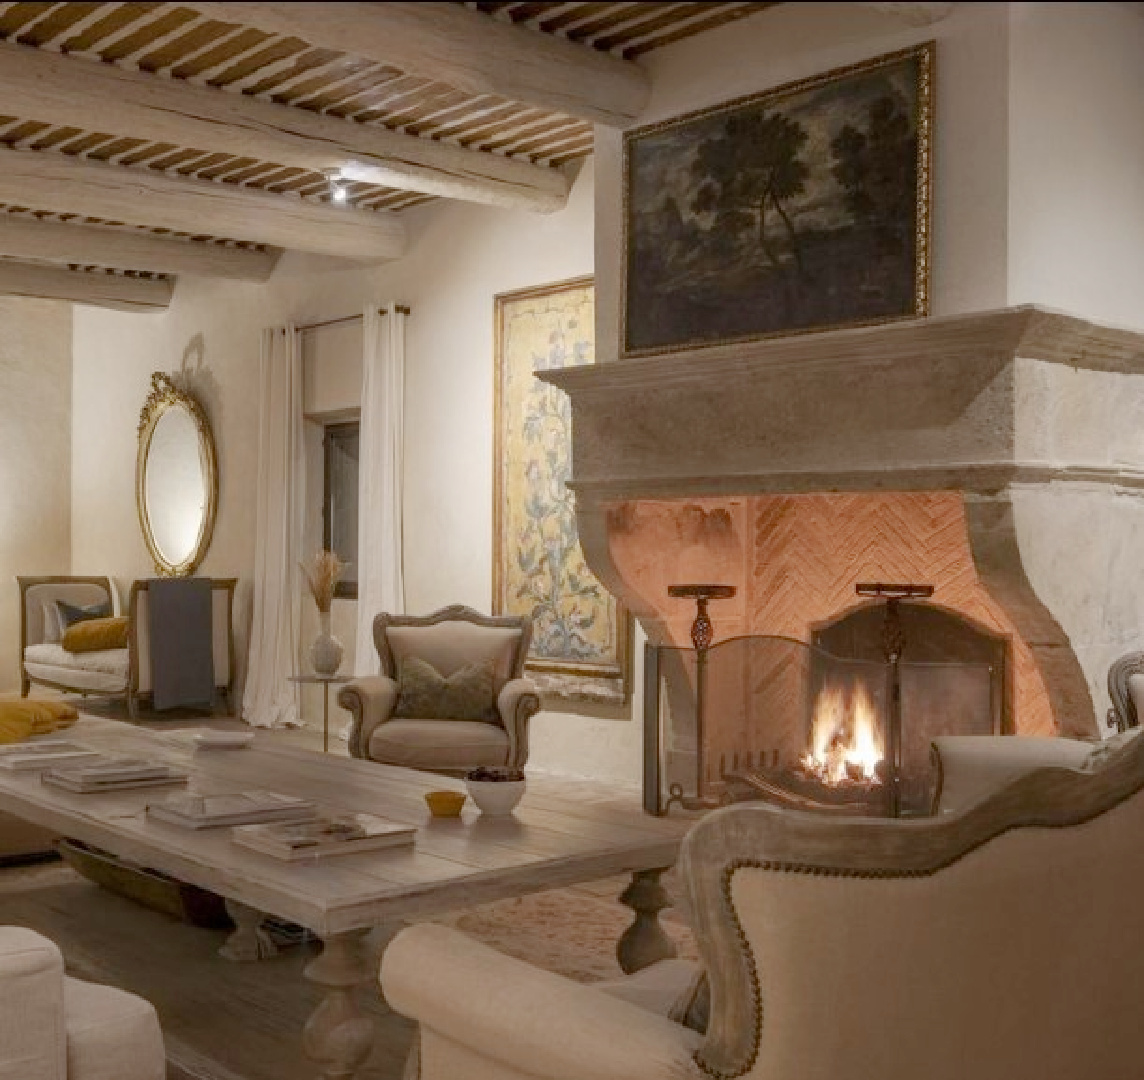 French country parlor with stone fireplace. Warm European luxury and cozy opulence in a French vacation villa in Provence - La Bastide de Laurence. #frenchbastide #frenchvilla #luxuryvilla #provencevilla #warmeuropeanluxury #cozyopulence #provencehomes #frenchcountryinterior